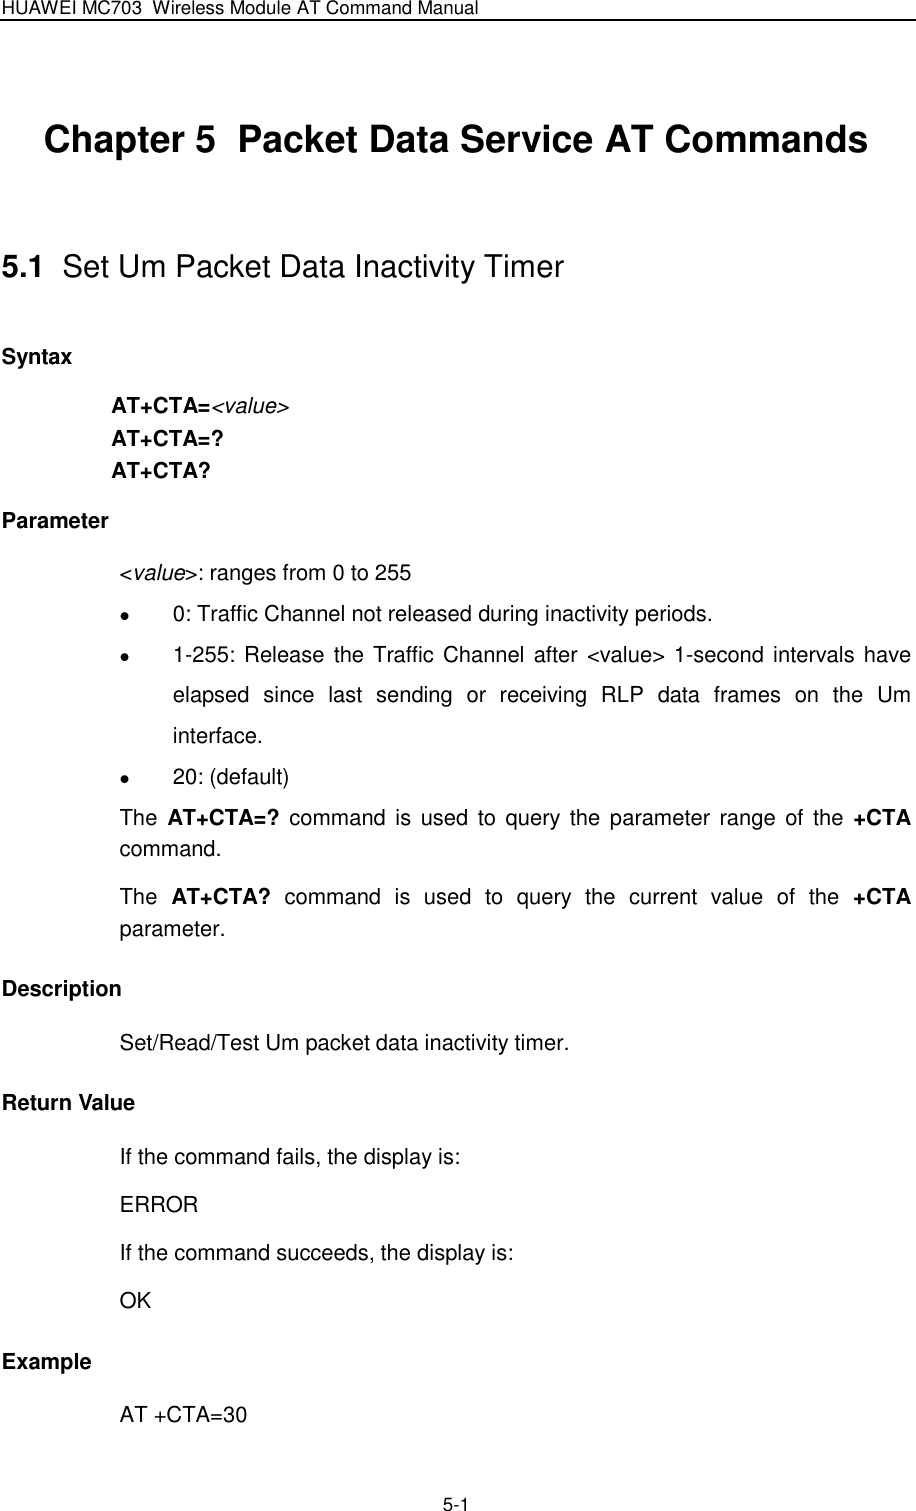 HUAWEI MC703 Wireless Module AT Command Manual   5-1 Chapter 5  Packet Data Service AT Commands 5.1  Set Um Packet Data Inactivity Timer Syntax AT+CTA=&lt;value&gt; AT+CTA=? AT+CTA? Parameter &lt;value&gt;: ranges from 0 to 255  0: Traffic Channel not released during inactivity periods.  1-255: Release the Traffic Channel after &lt;value&gt; 1-second intervals have elapsed  since  last  sending  or  receiving  RLP  data  frames  on  the  Um interface.  20: (default) The  AT+CTA=? command is  used  to query  the parameter range of the +CTA command. The  AT+CTA?  command  is  used  to  query  the  current  value  of  the  +CTA parameter.   Description Set/Read/Test Um packet data inactivity timer. Return Value If the command fails, the display is: ERROR If the command succeeds, the display is: OK Example AT +CTA=30 